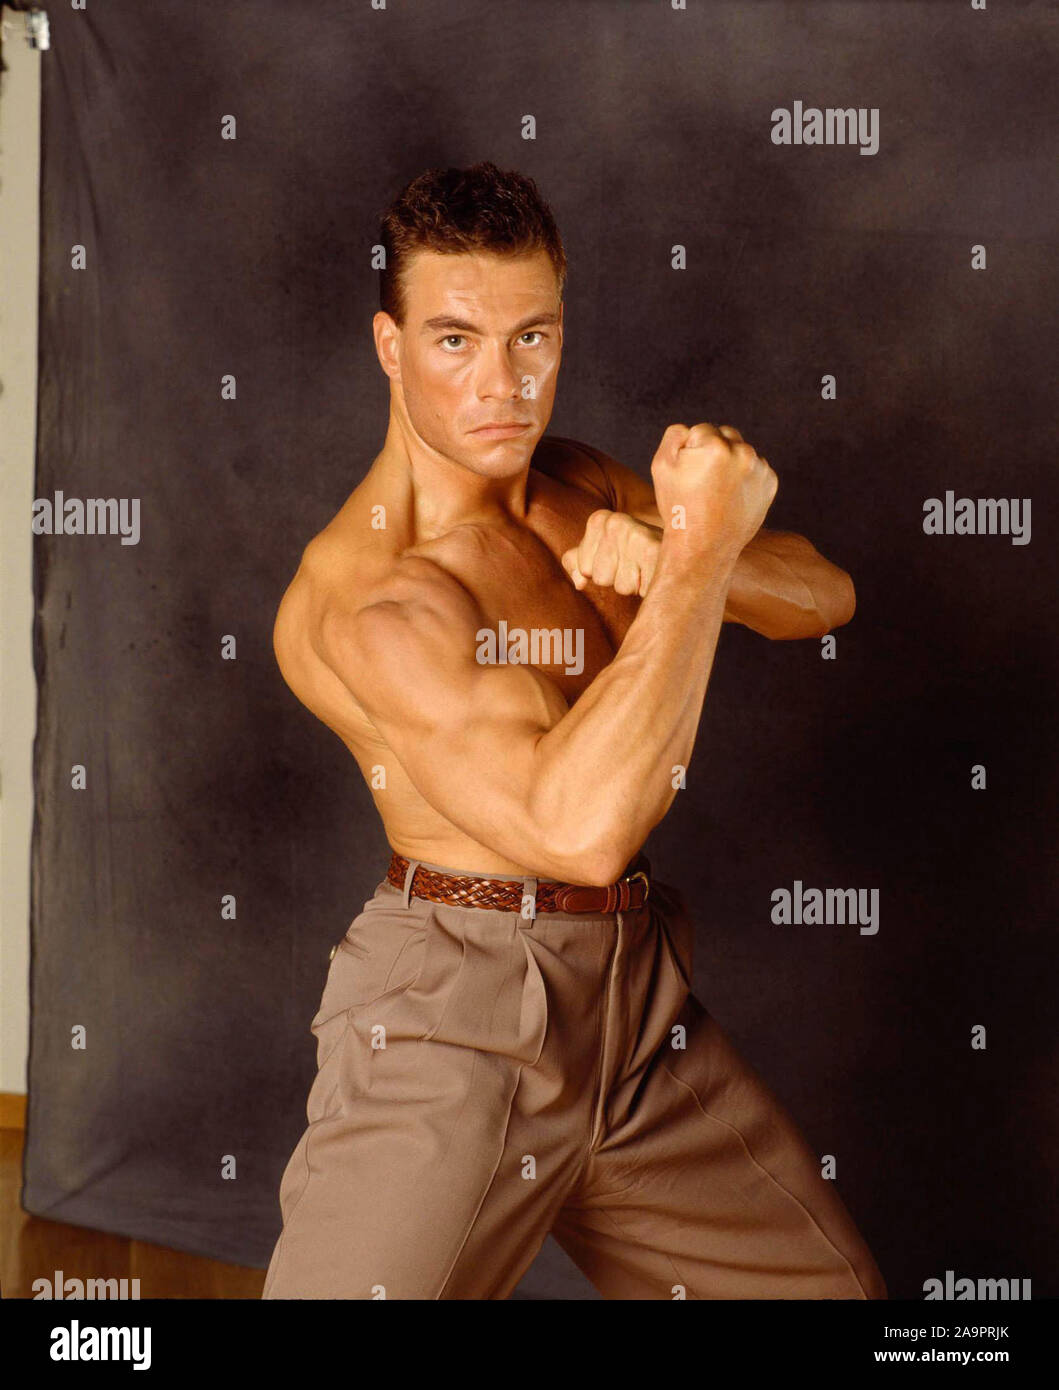 JEAN-CLAUDE VAN DAMME in DOUBLE IMPACT (1991), directed by SHELDON LETTICH.  Credit: STONE GROUP PICTURES/COLUMBIA TRI-STAR / Album Stock Photo - Alamy